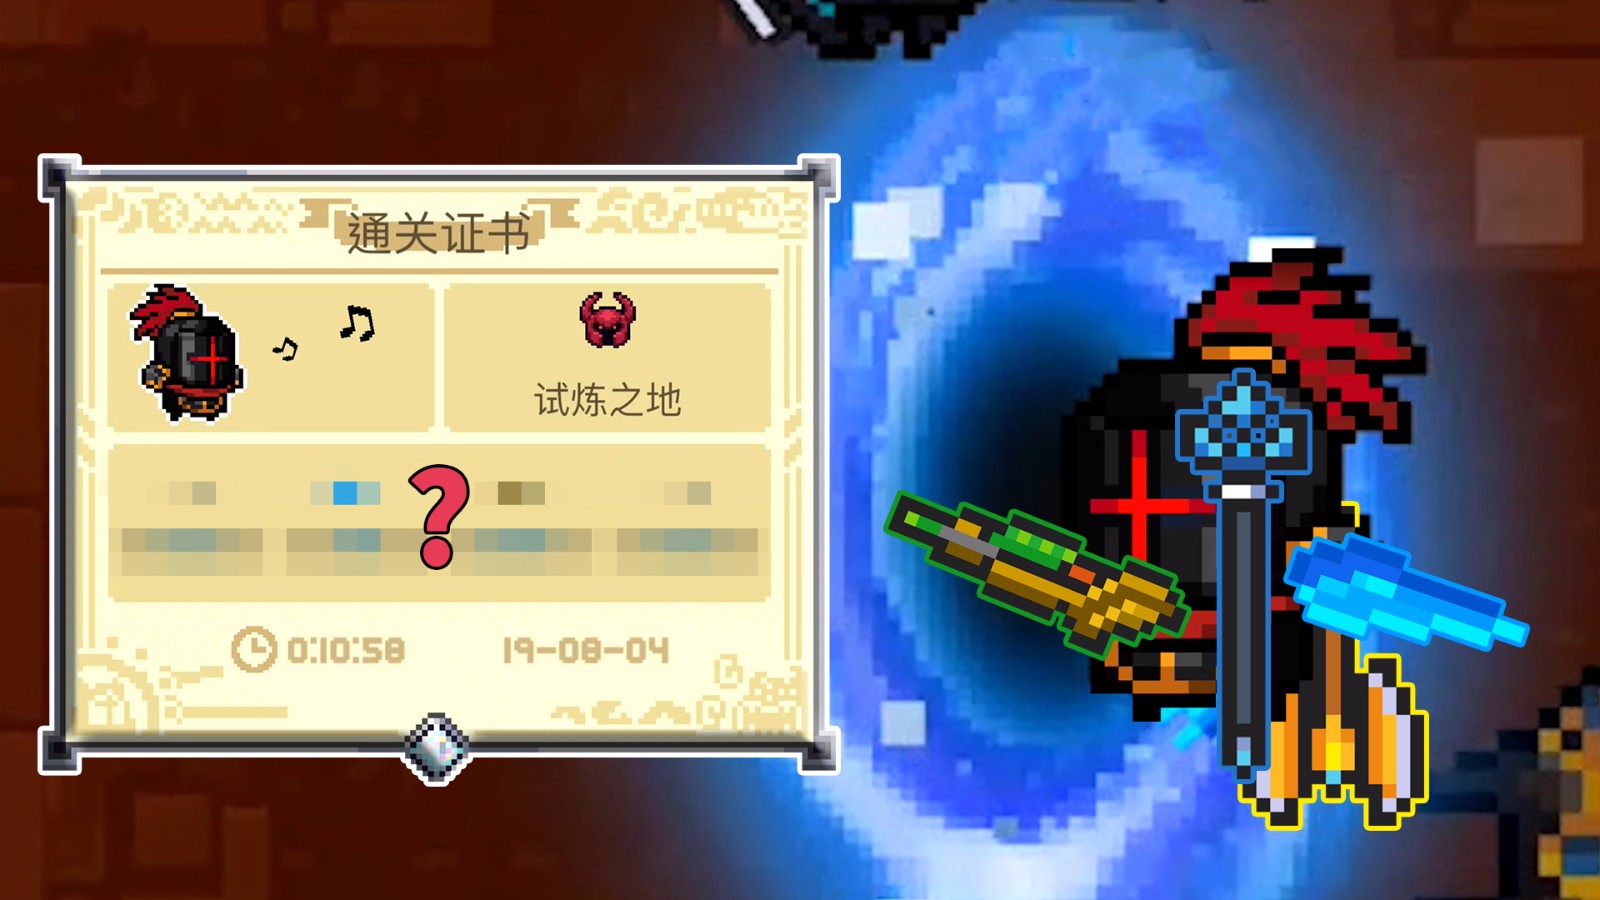 Vigorous Knight: What will happen to the certificate after clearing customs with four weapons?